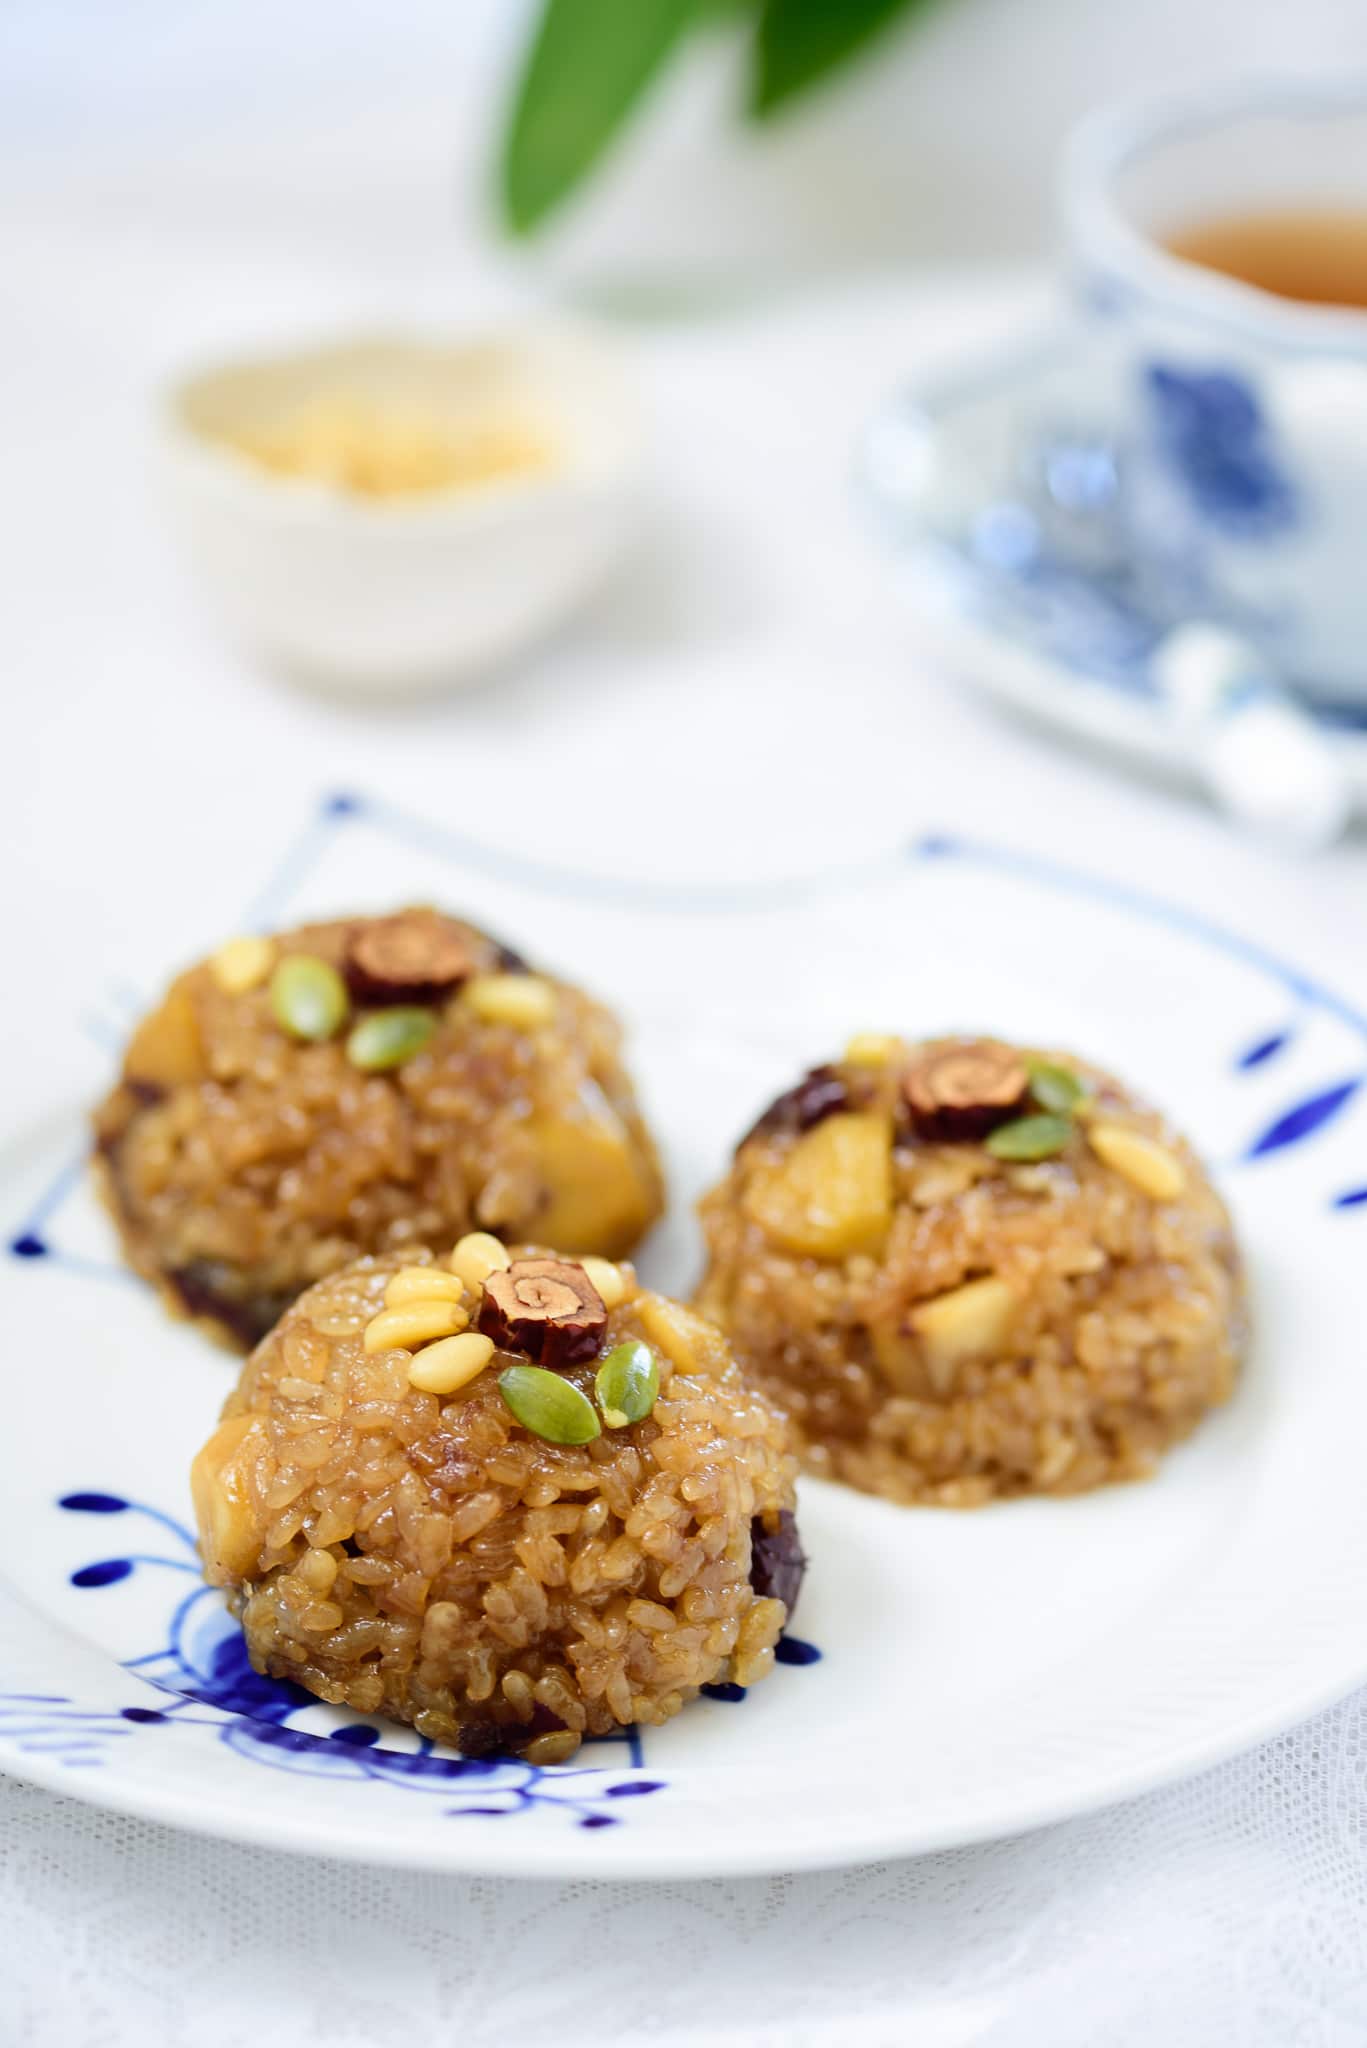 DSC4318 - Yaksik (Sweet Rice with Dried Fruits and Nuts)